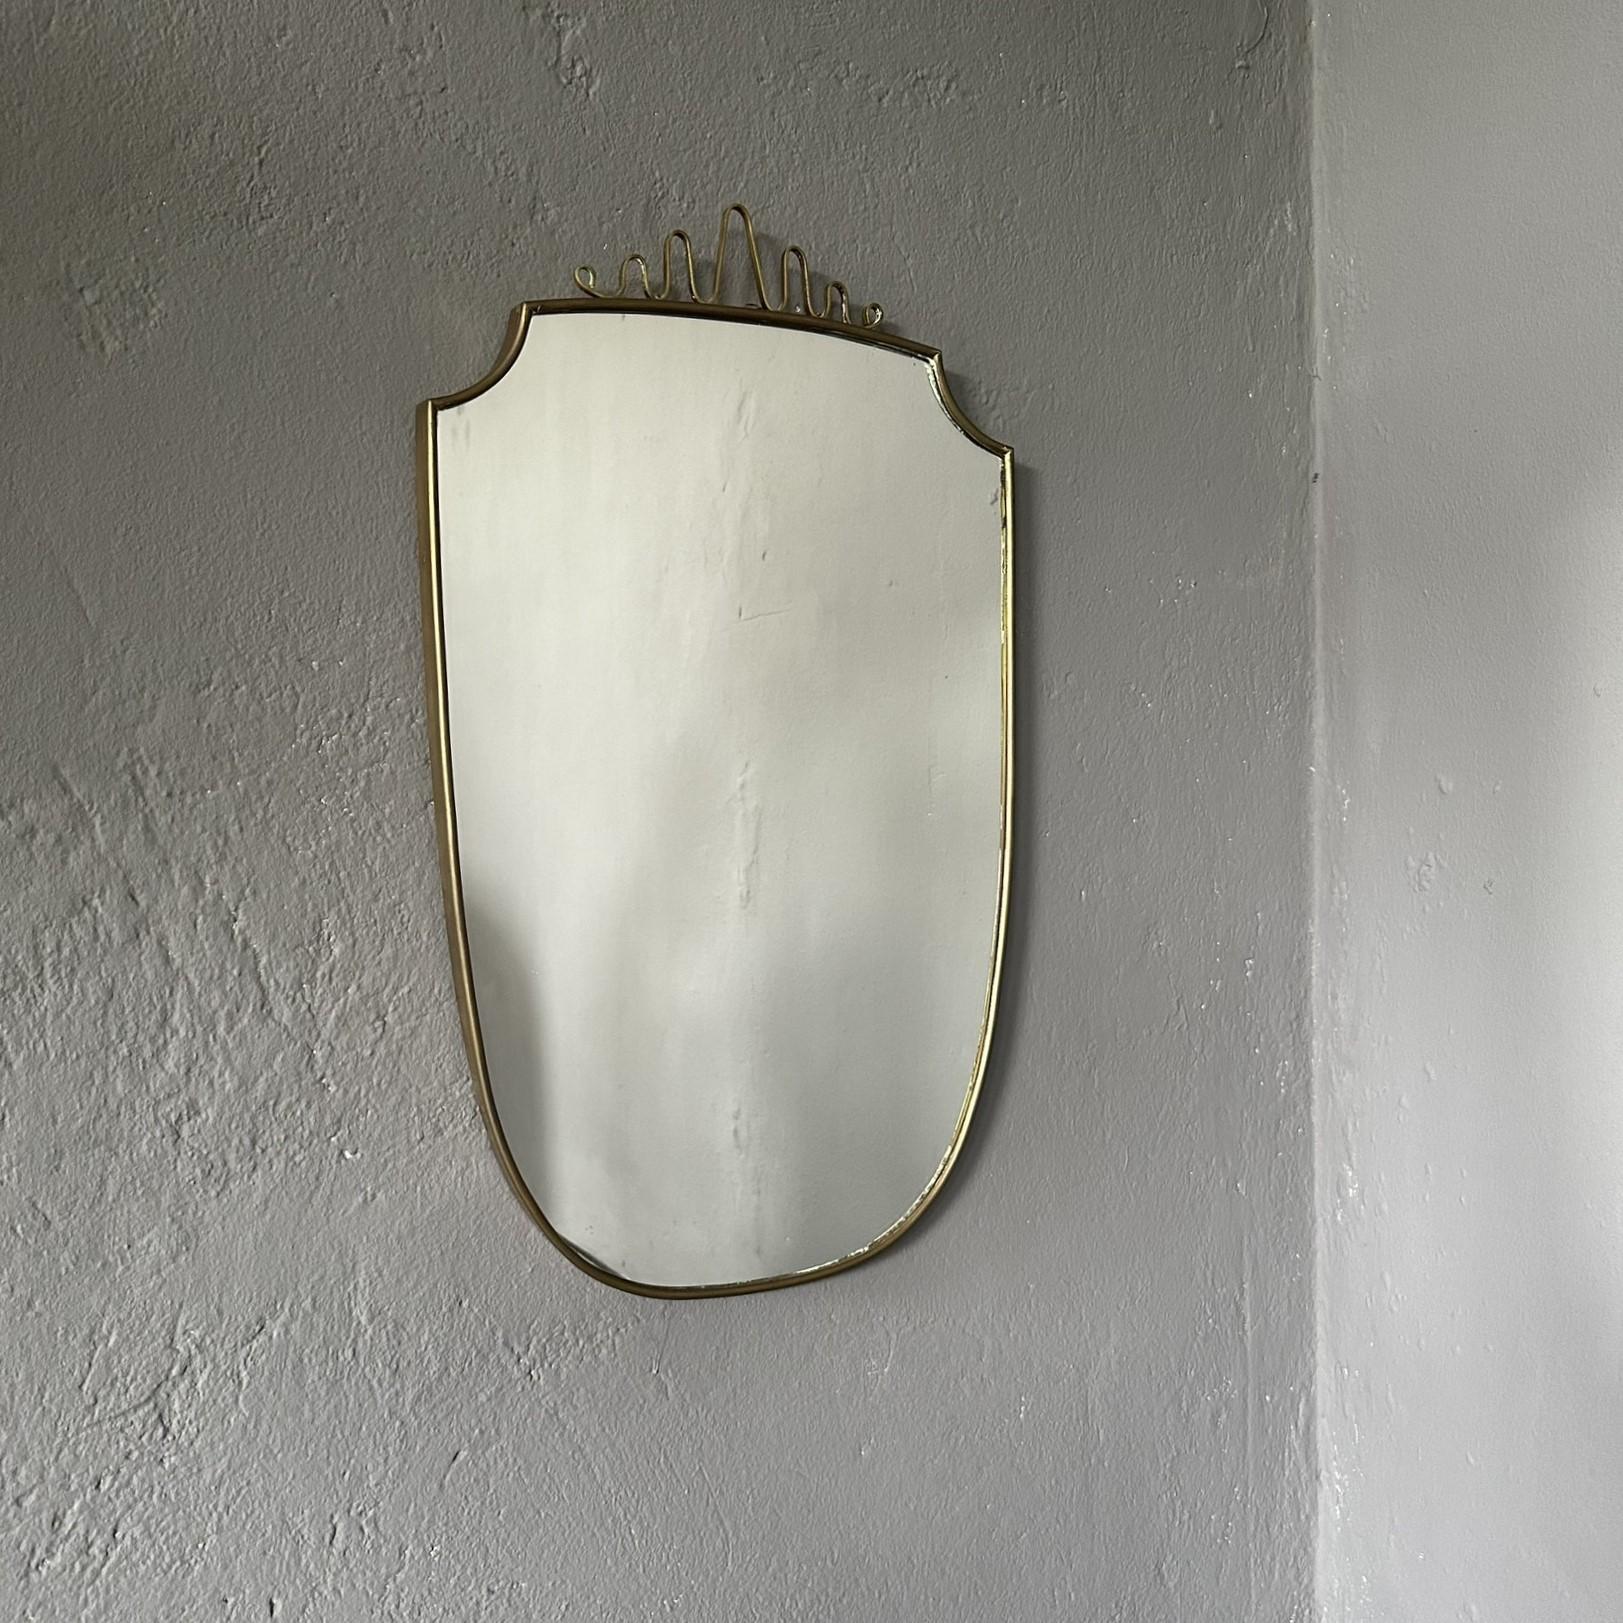 Mid-Century Modern Italian wall mirror, 1950, with brass frame and decoration.

1950s wall mirror, Italian manufacture, made in the style of Giò Ponti.
The mirror has a brass frame with decoration on the top.
Overall height 87cm.
On the decoration,